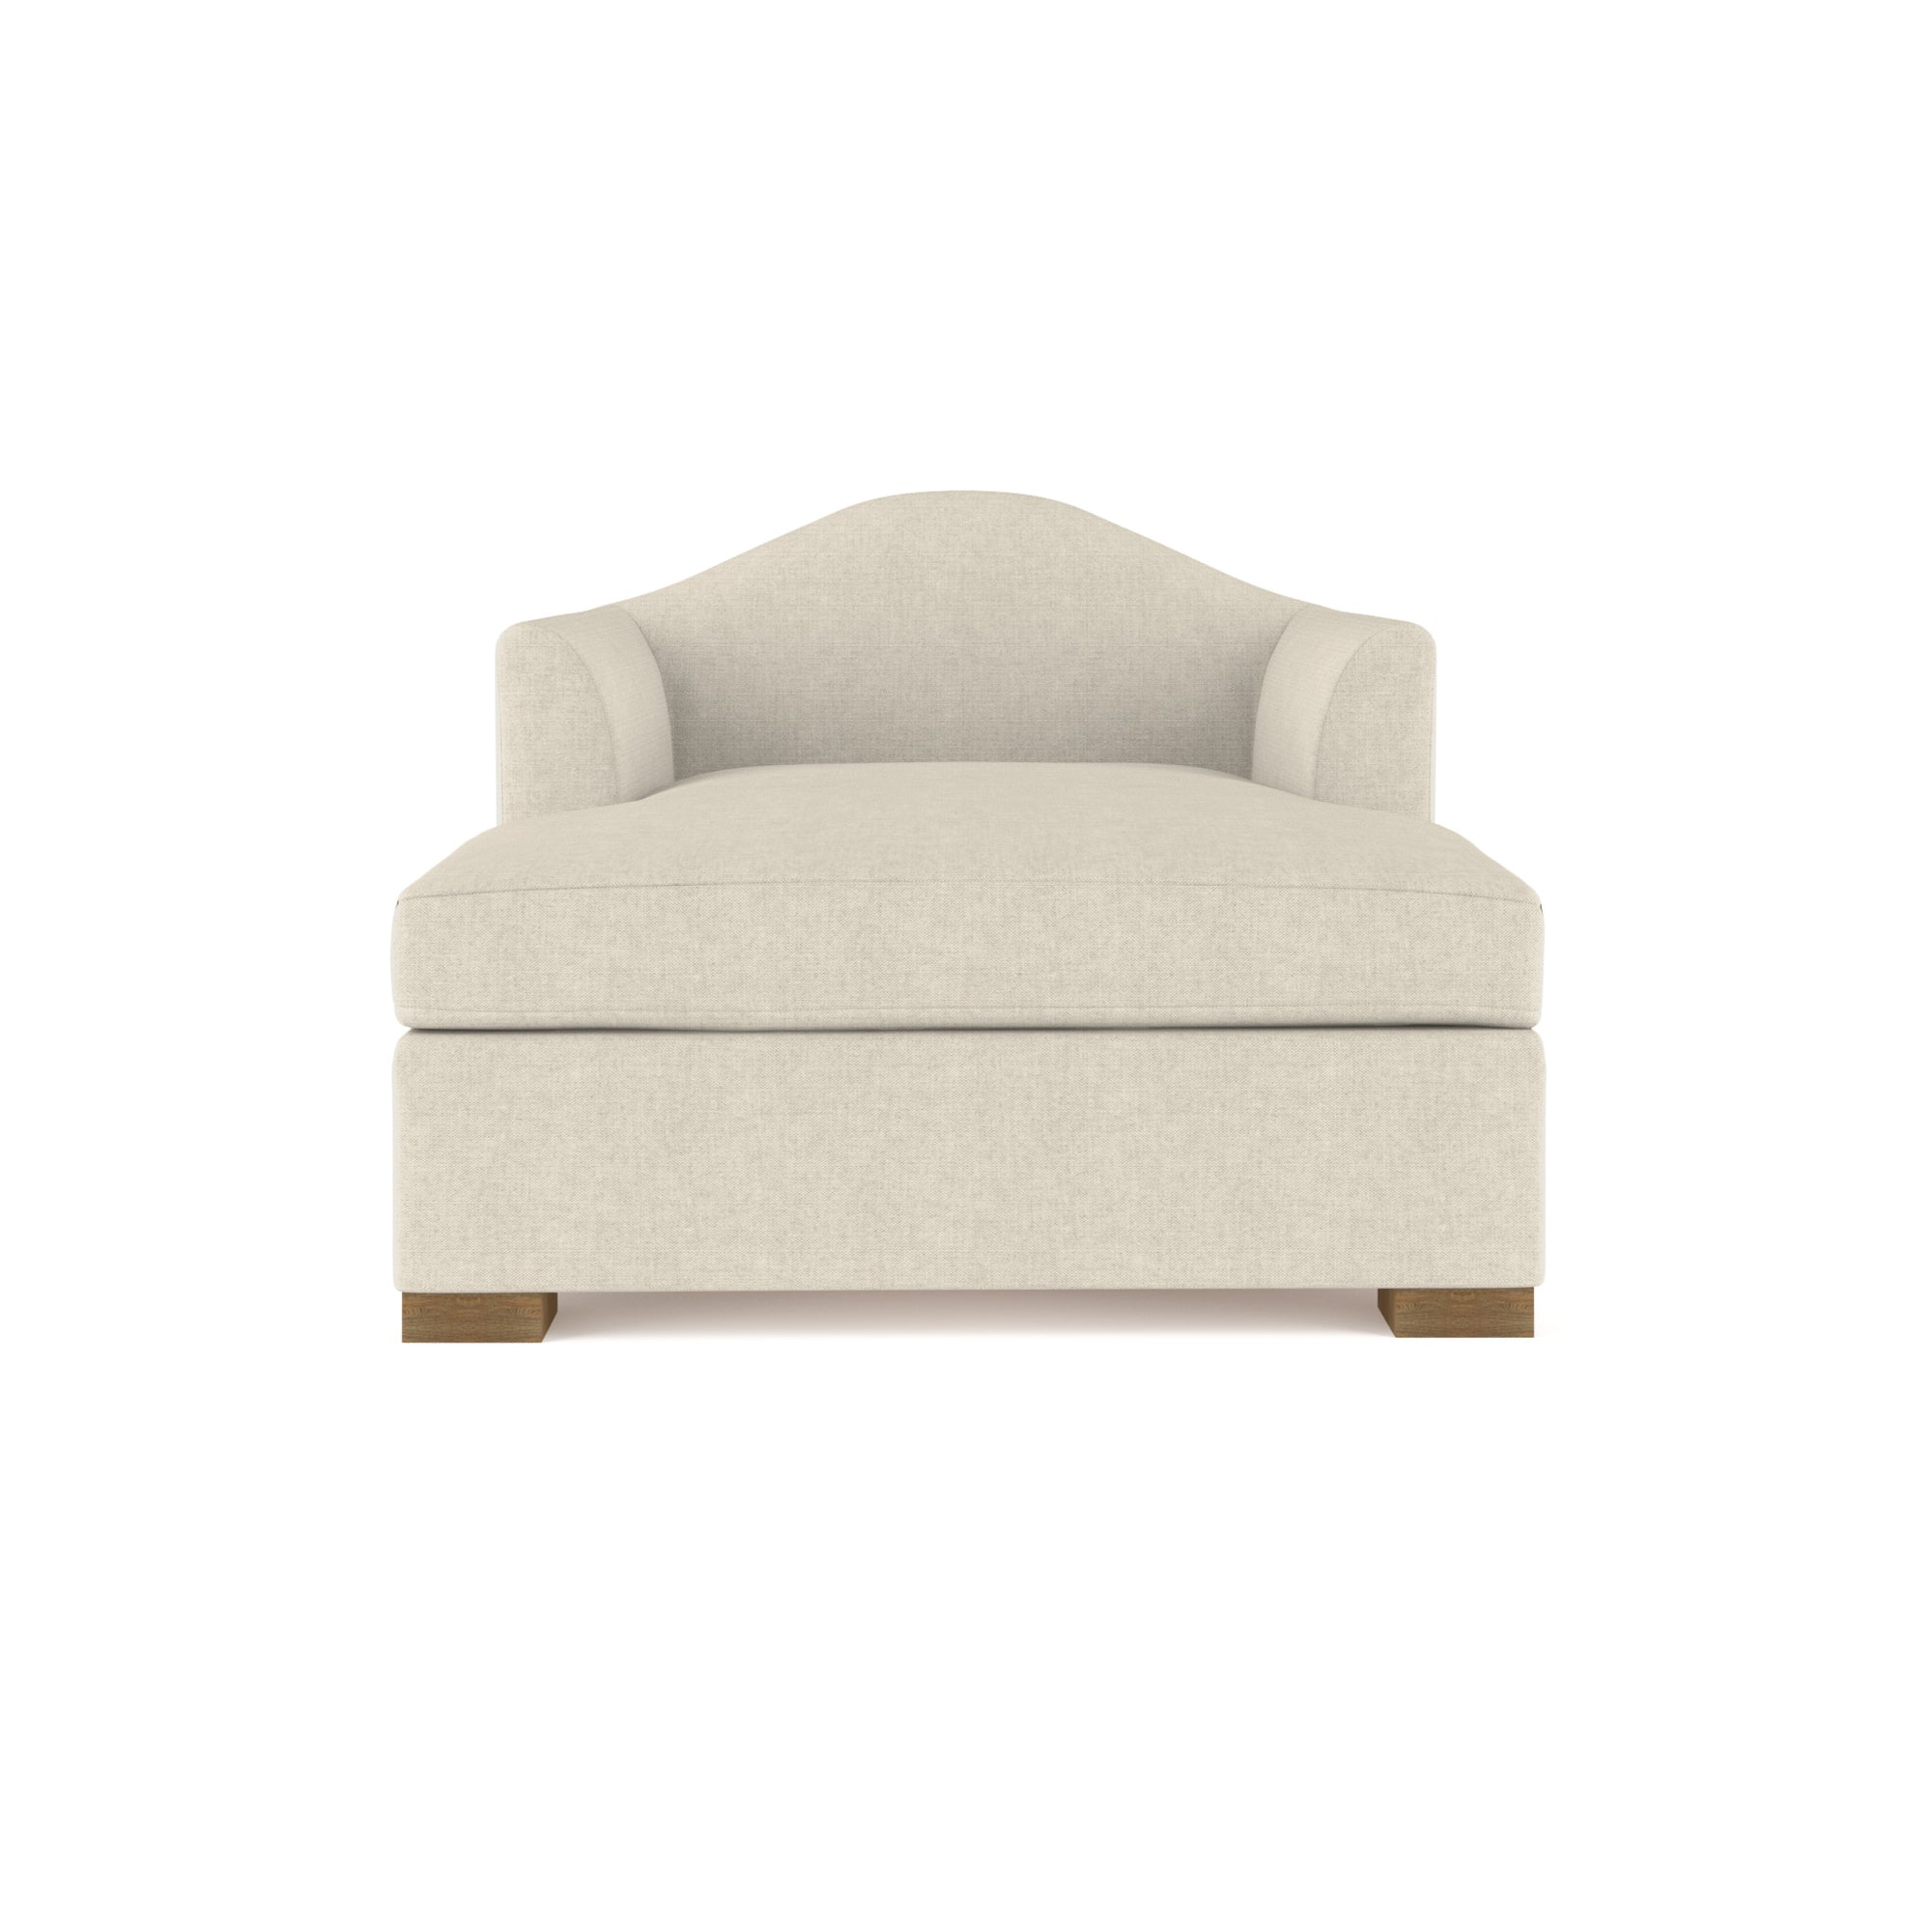 Horatio Chaise - Oyster Box Weave Linen